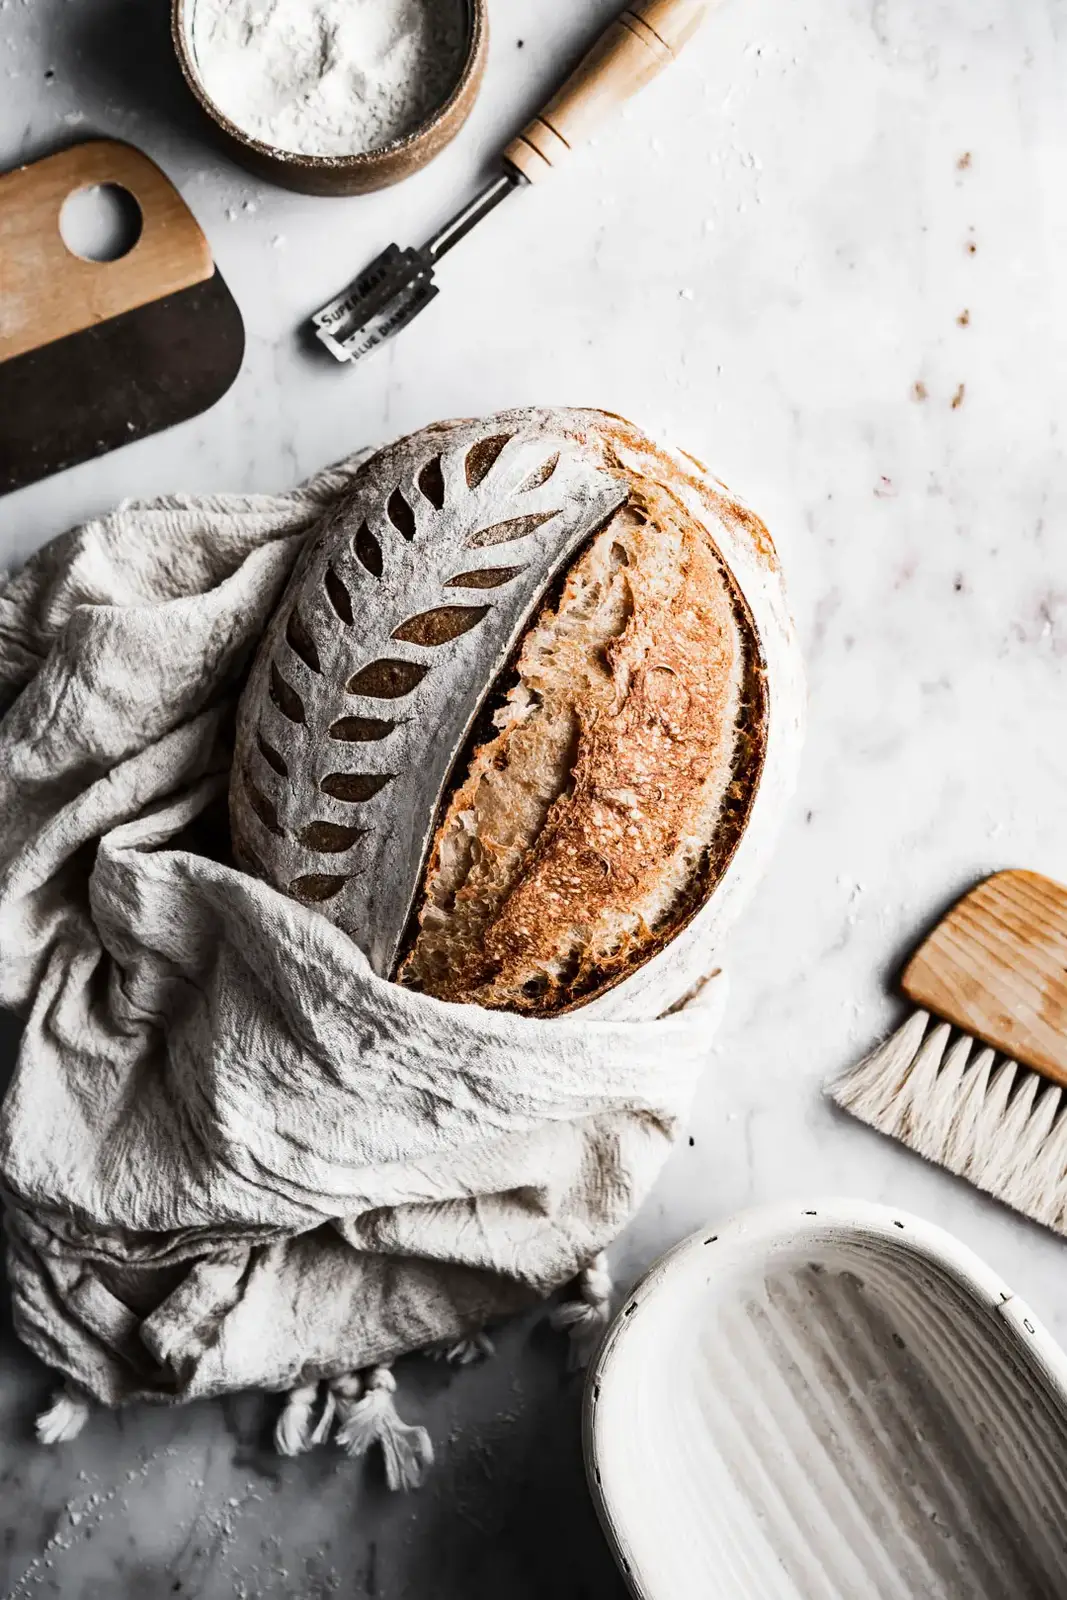 Yes, you can bake with sourdough starter straight from the fridge